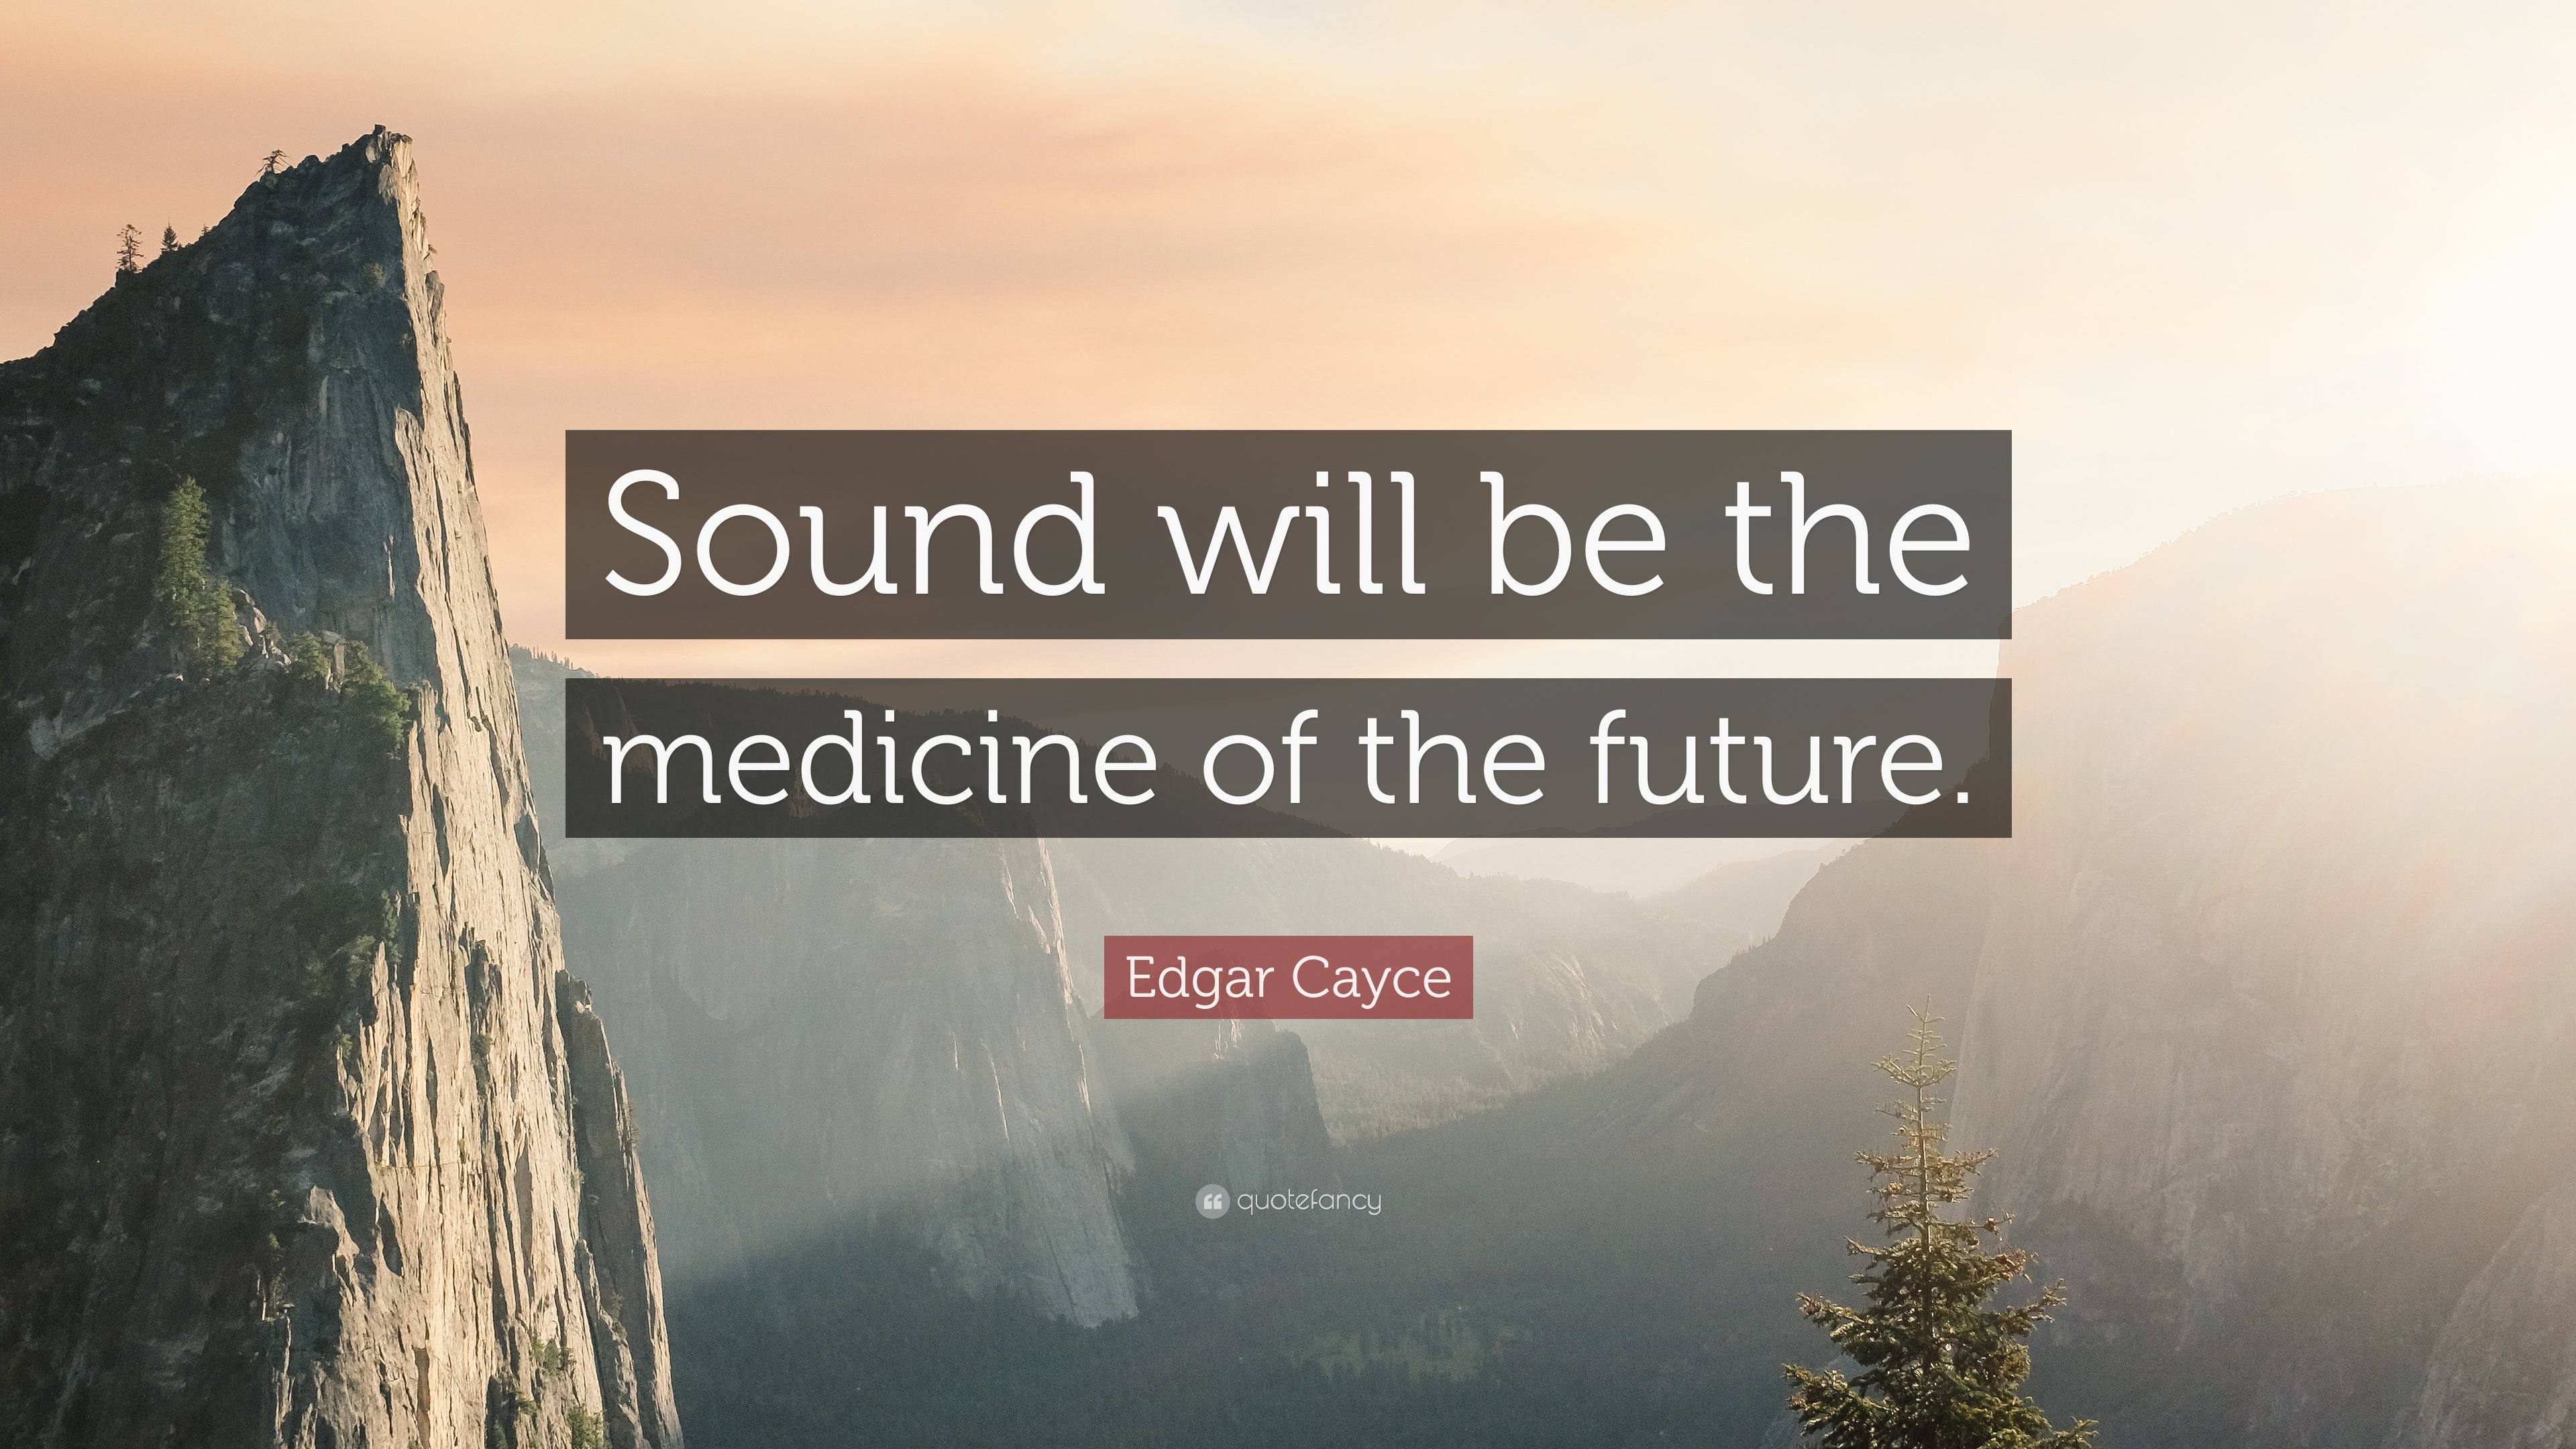 Edgar Cayce Quote “Sound will be the medicine of the future.”